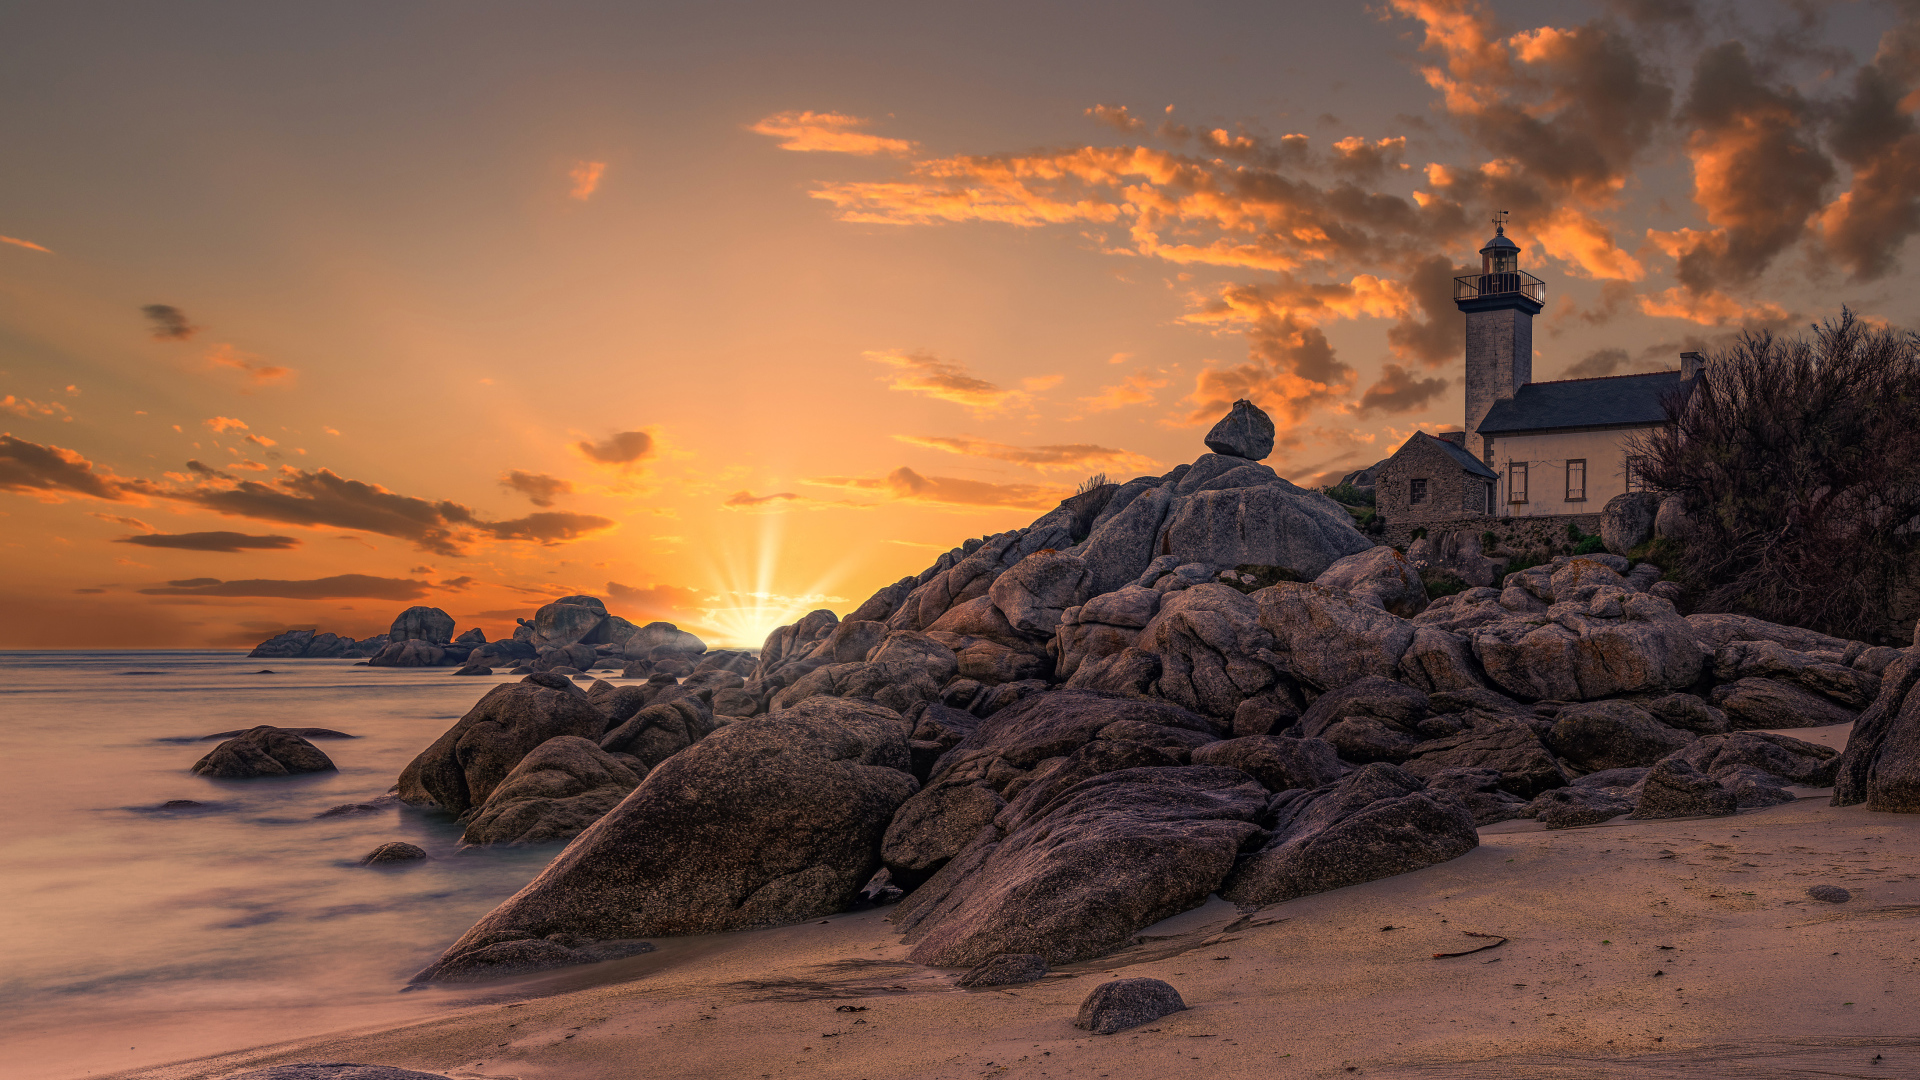 Lighthouse on the shore of a stone shore at sunset